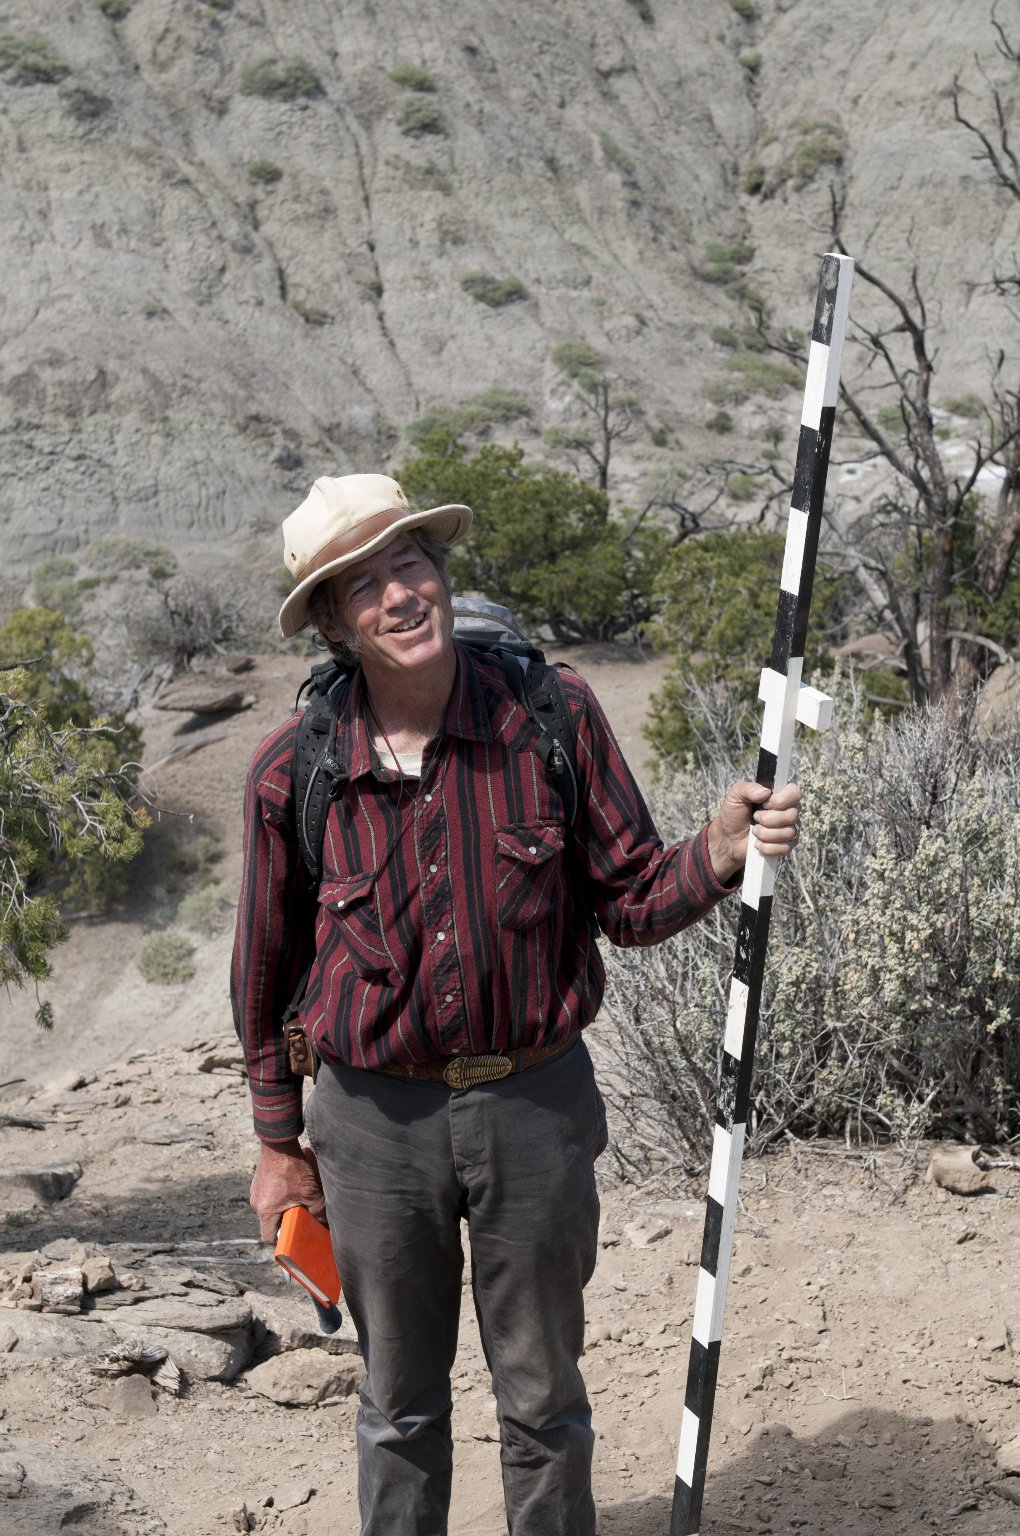 Dr. Bob Raynolds, DMNS Research Associate, holds a survey pole in one hand and his field journal in the other as he looks up at their most recent find.